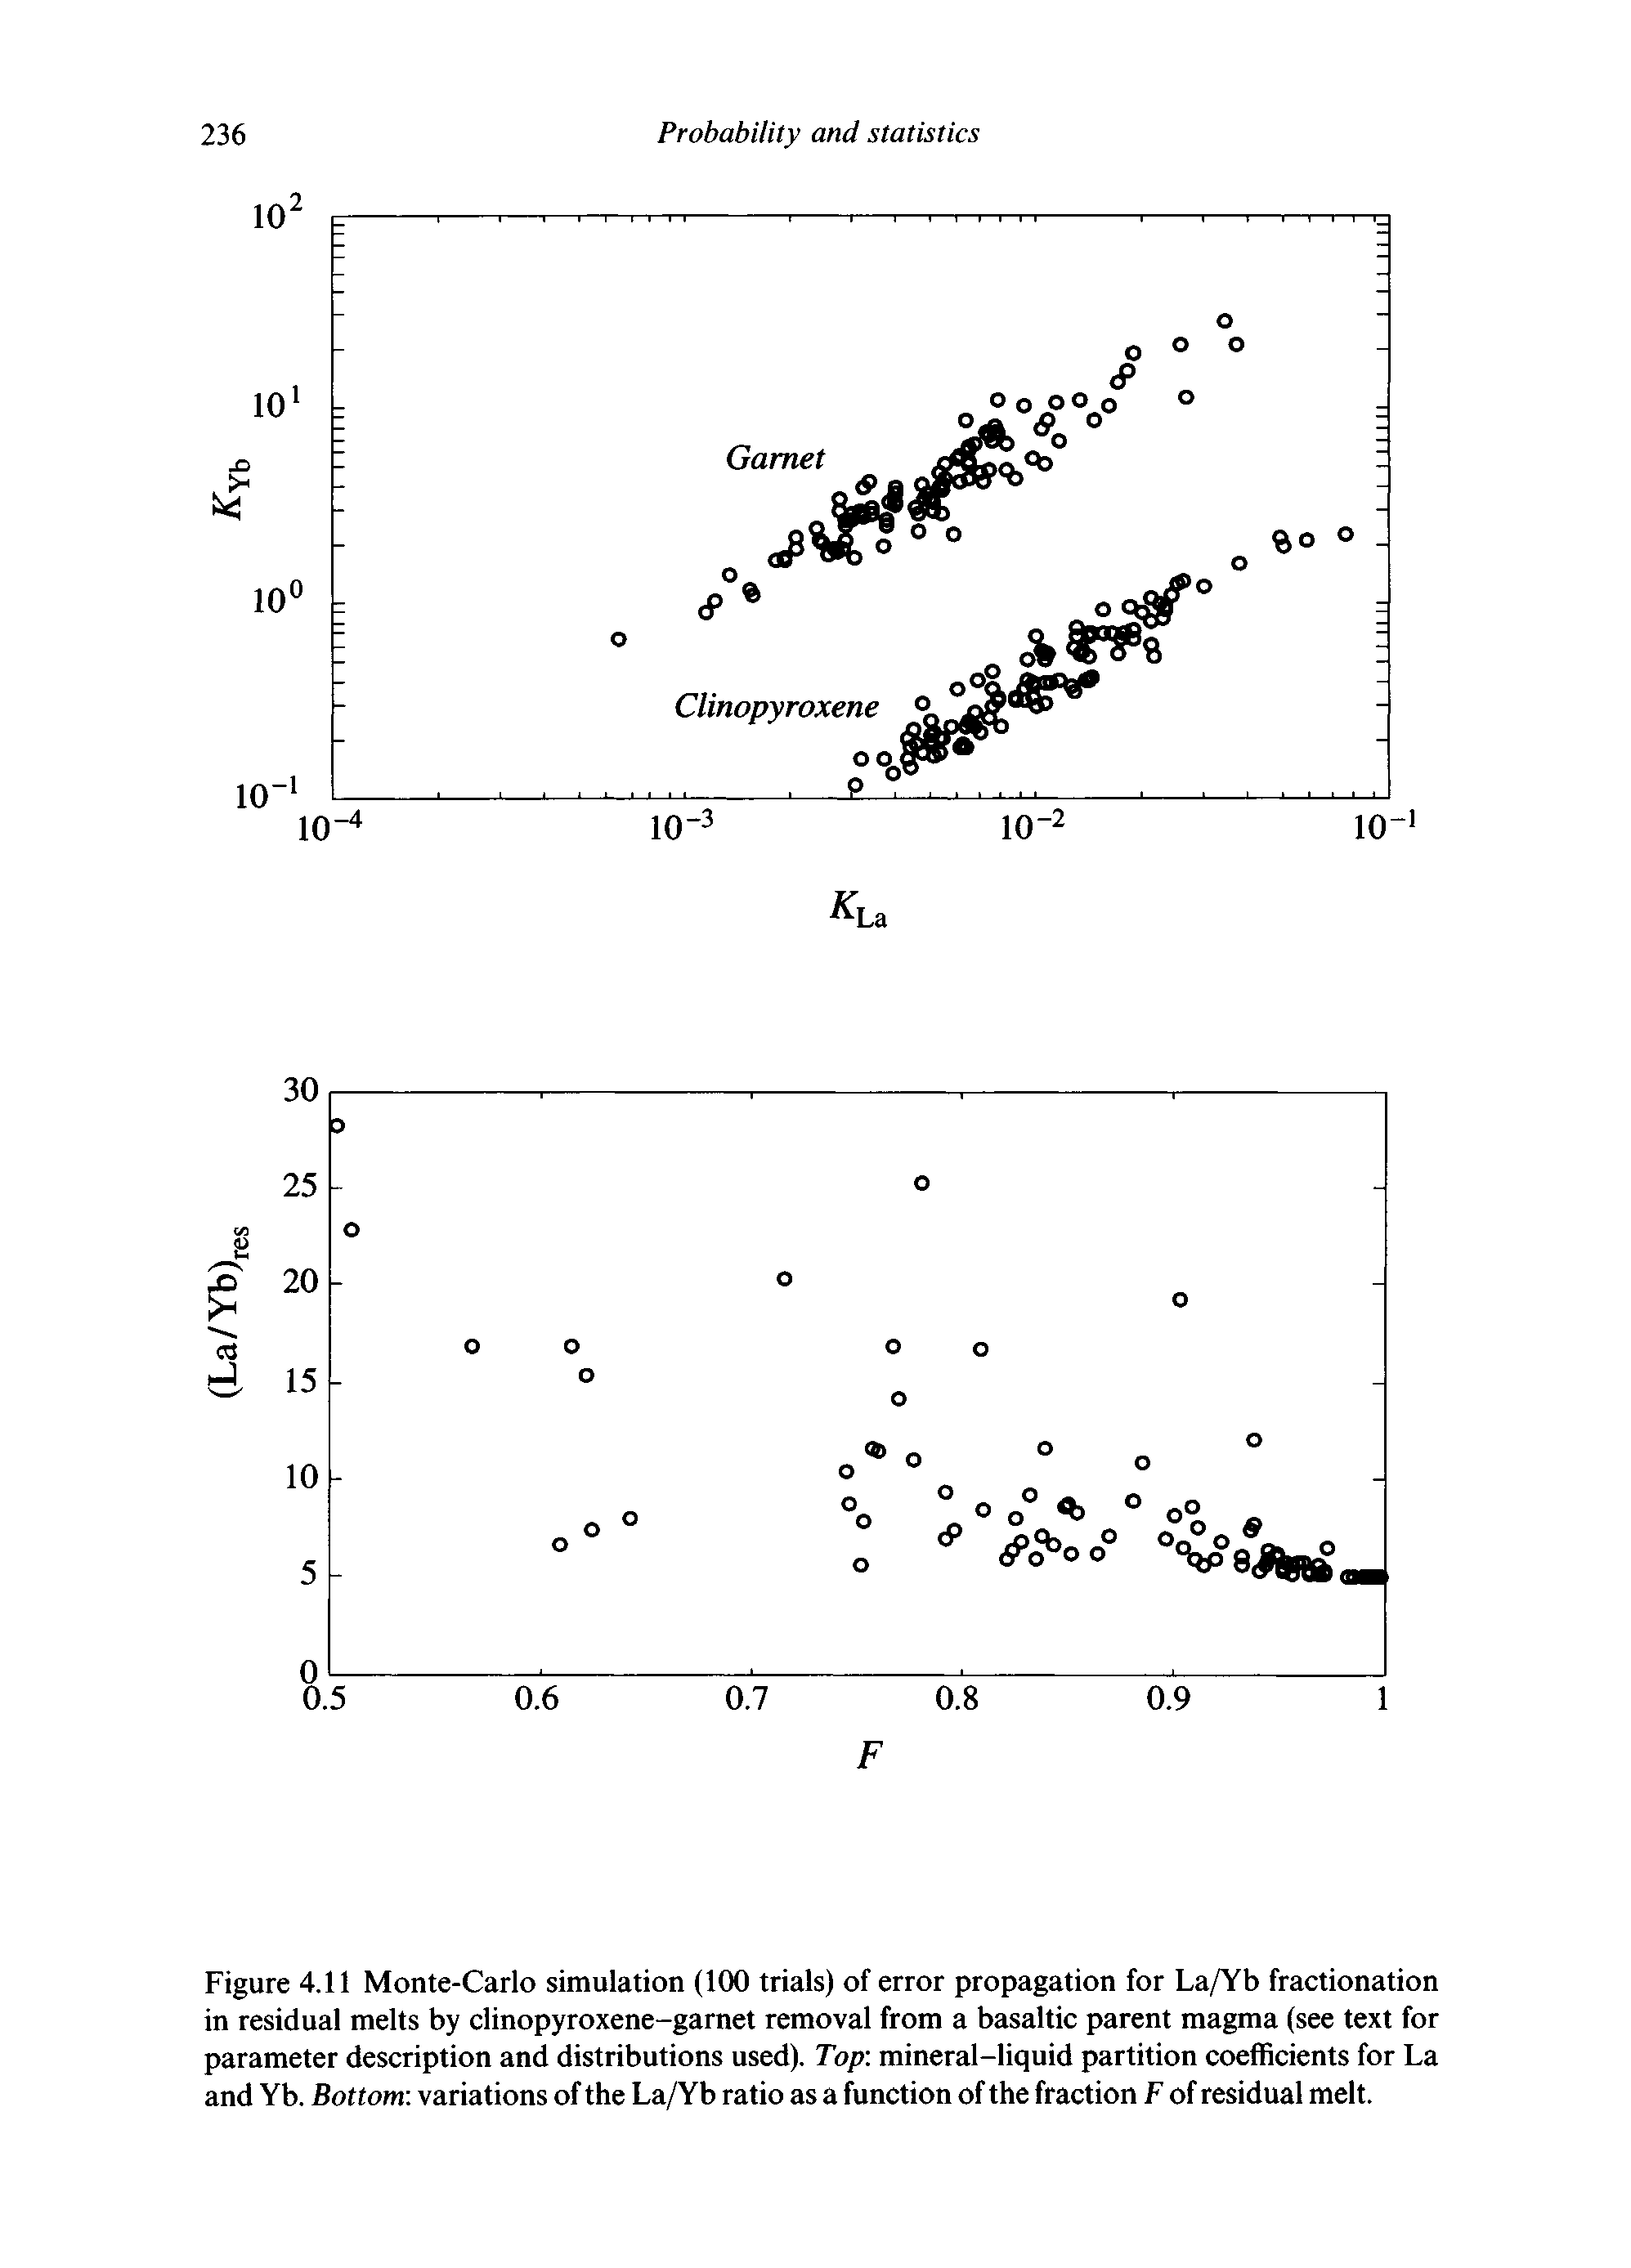 Figure 4.11 Monte-Carlo simulation (100 trials) of error propagation for La/Yb fractionation in residual melts by clinopyroxene-garnet removal from a basaltic parent magma (see text for parameter description and distributions used). Top mineral-liquid partition coefficients for La and Yb. Bottom variations of the La/Yb ratio as a function of the fraction F of residual melt.